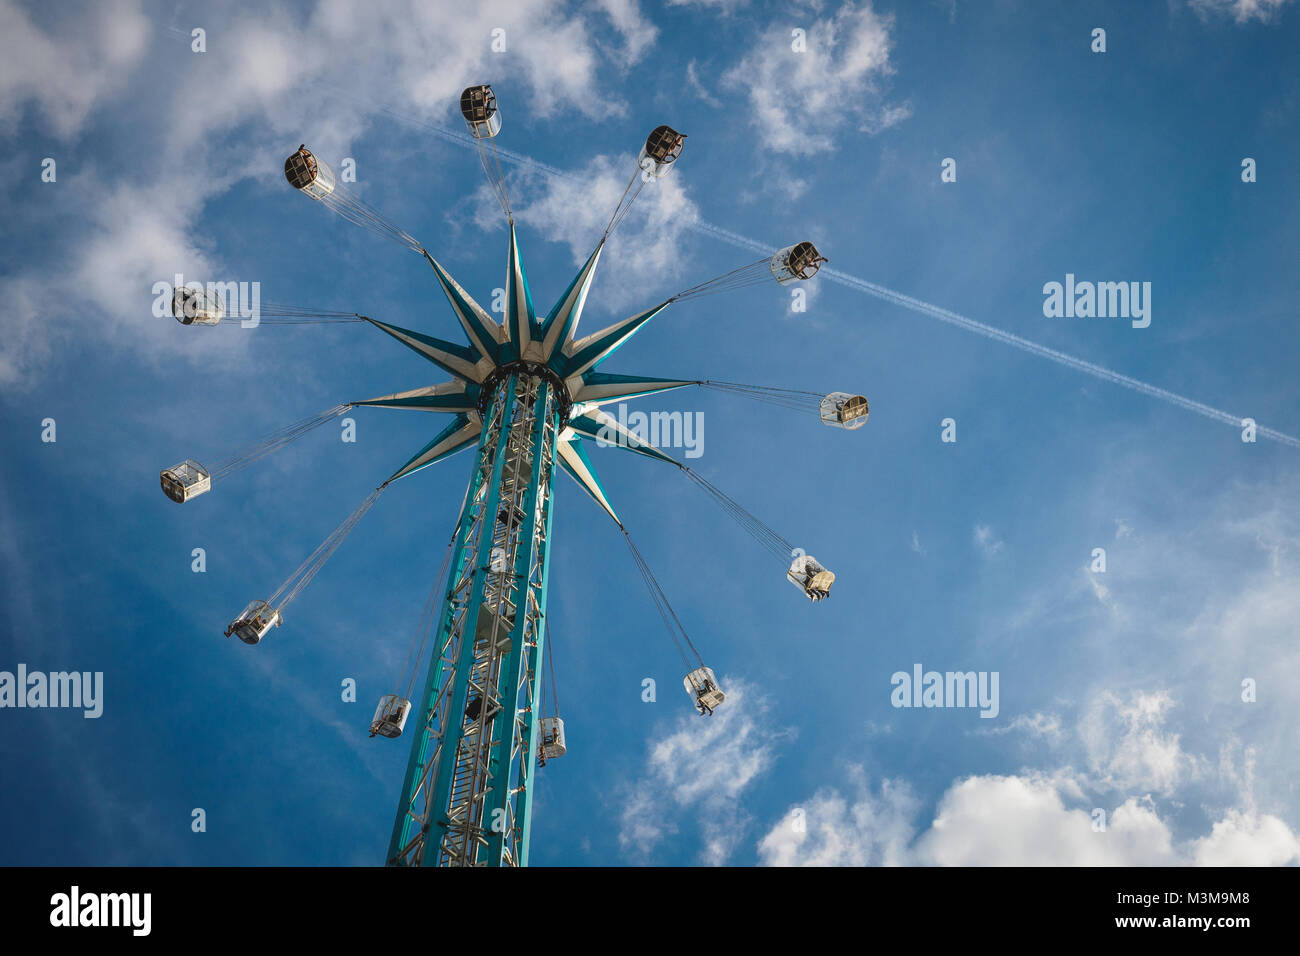 White and blue high chair swing ride in fun fair with a blue sky with clouds on the background. Landscape format. Stock Photo